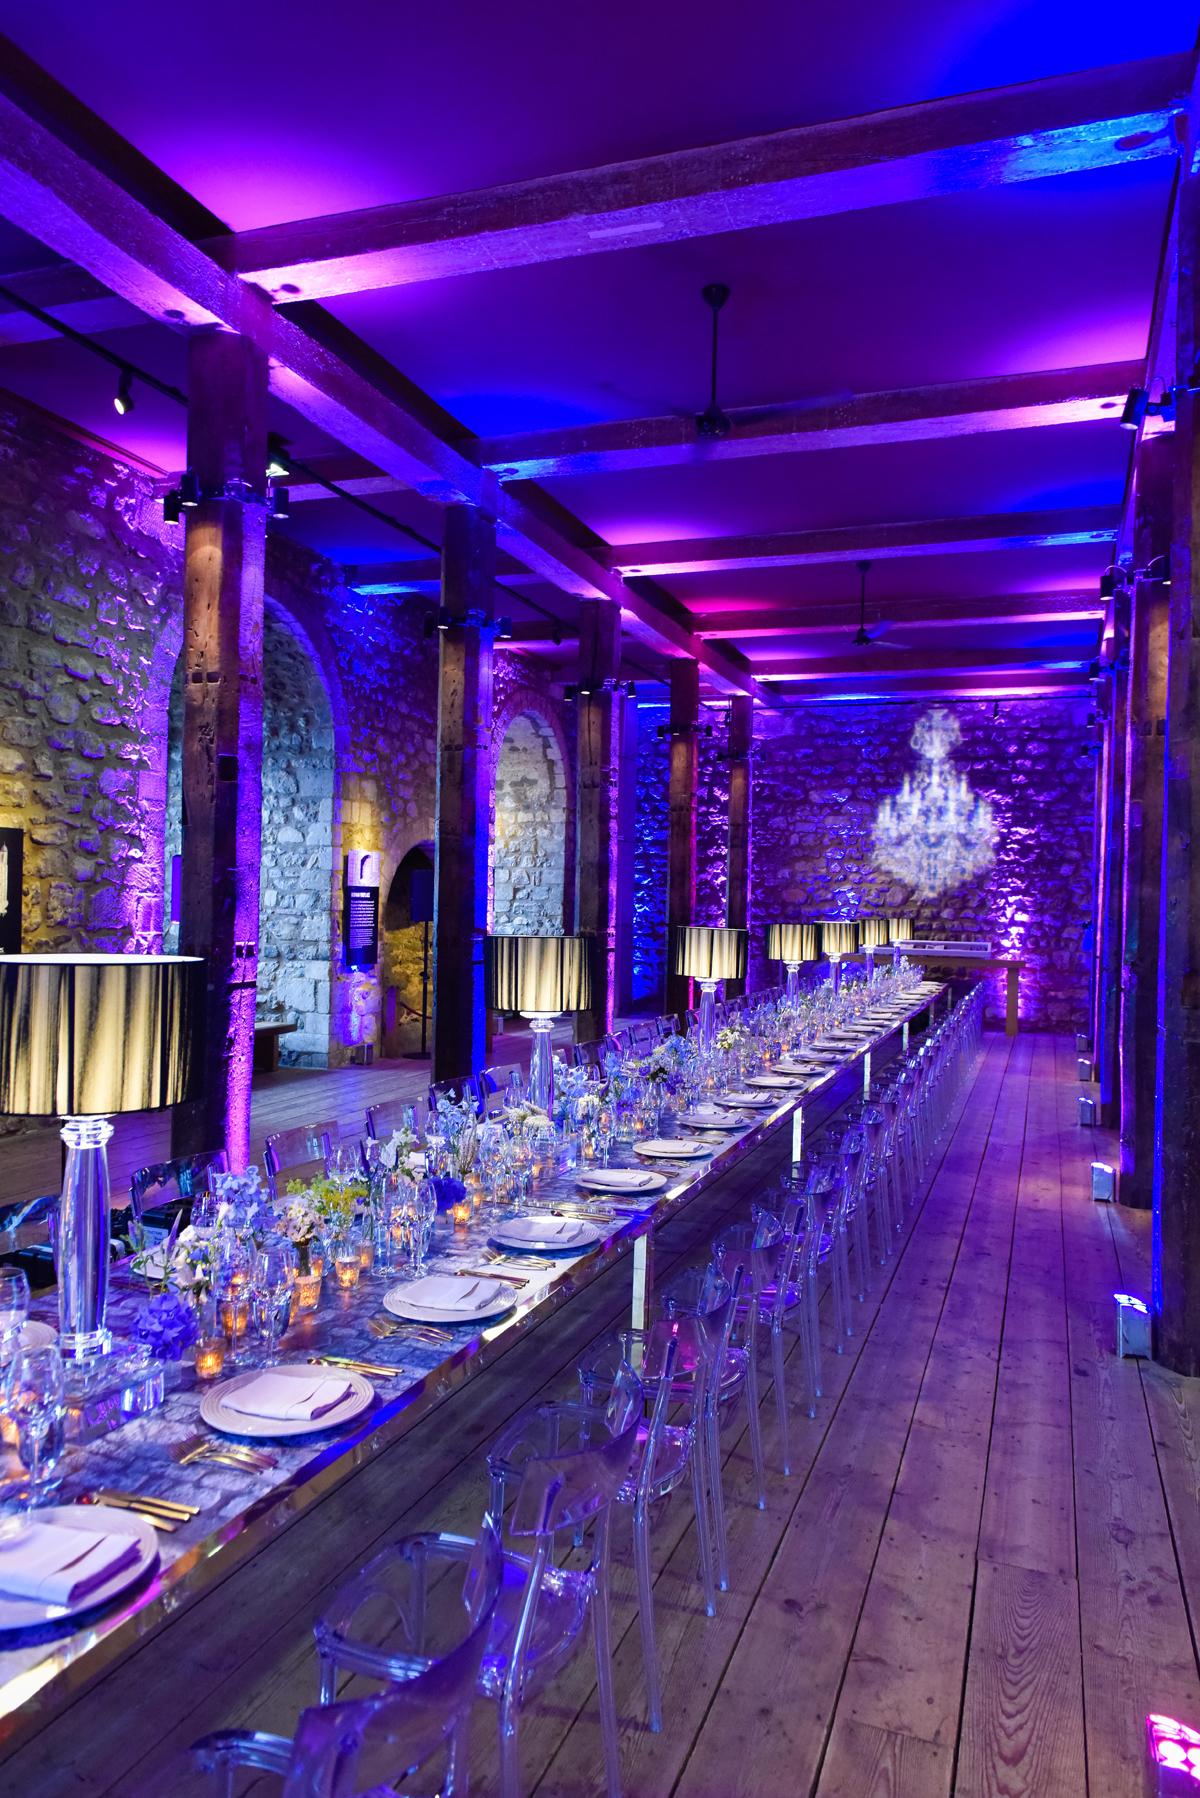 The Tower of London wedding venue